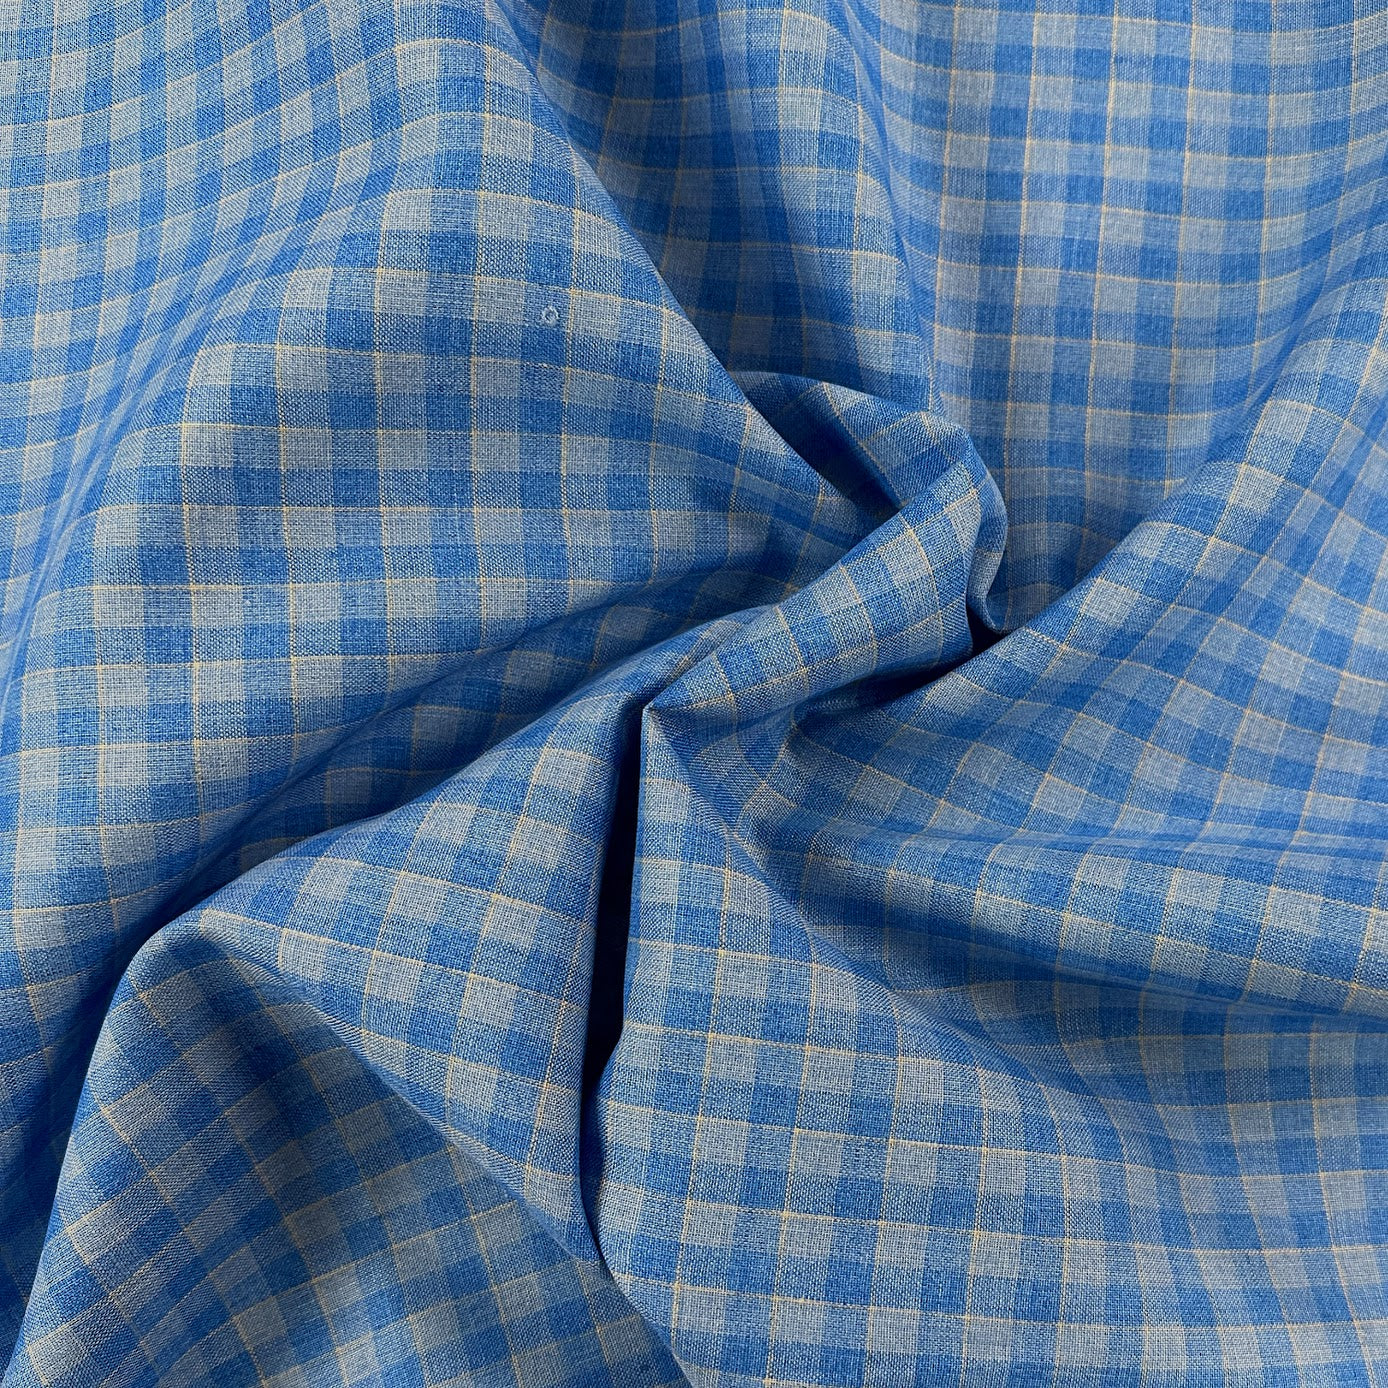 Yarn Dyed 100% Linen Plaid - Blue Check - 59"